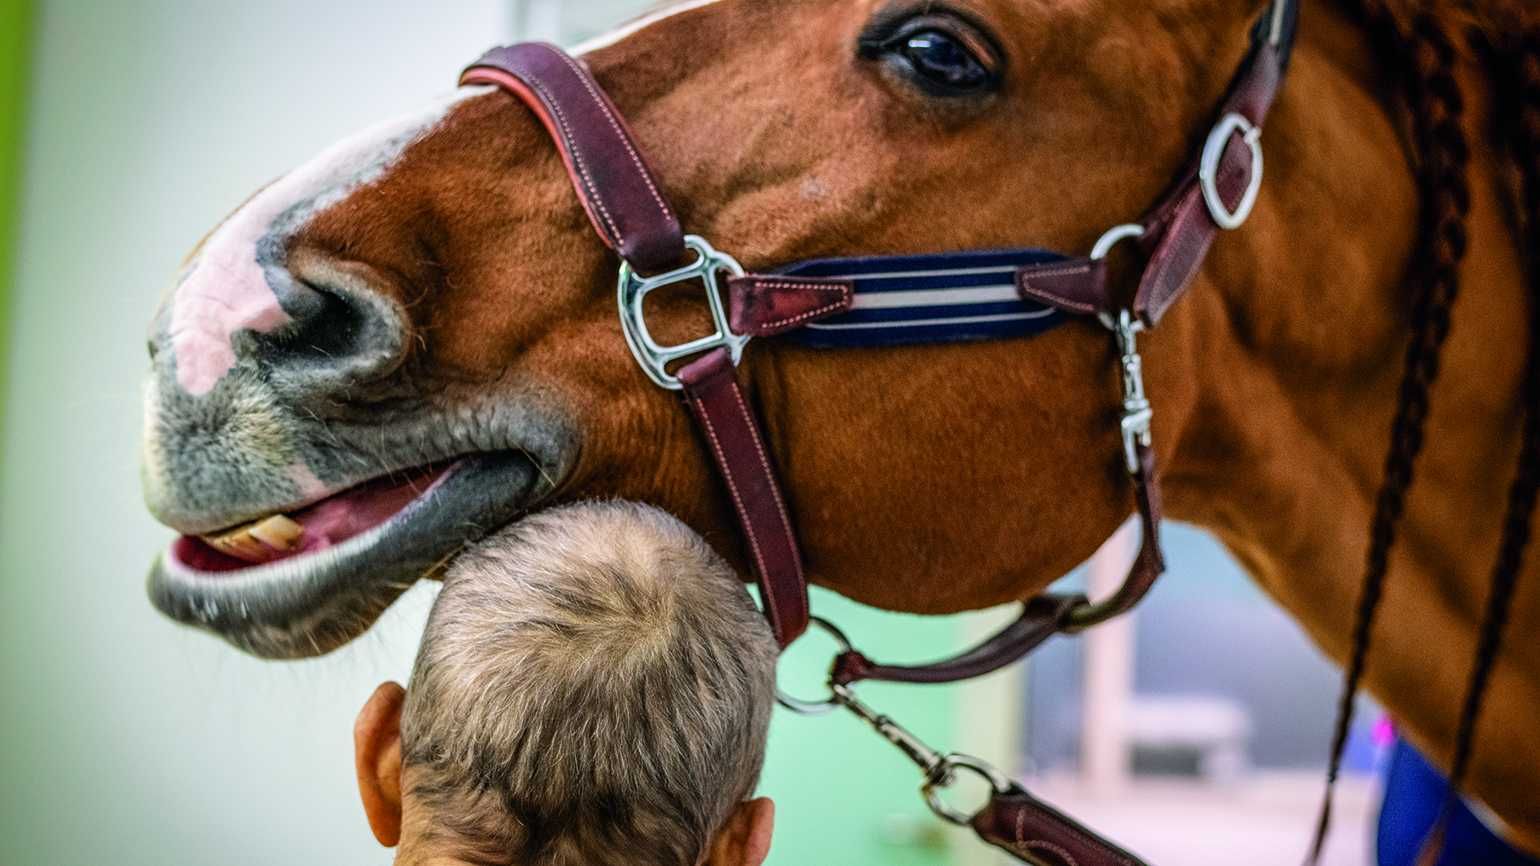 Peyo the horse doctor in inspiring stories of animals helping humans